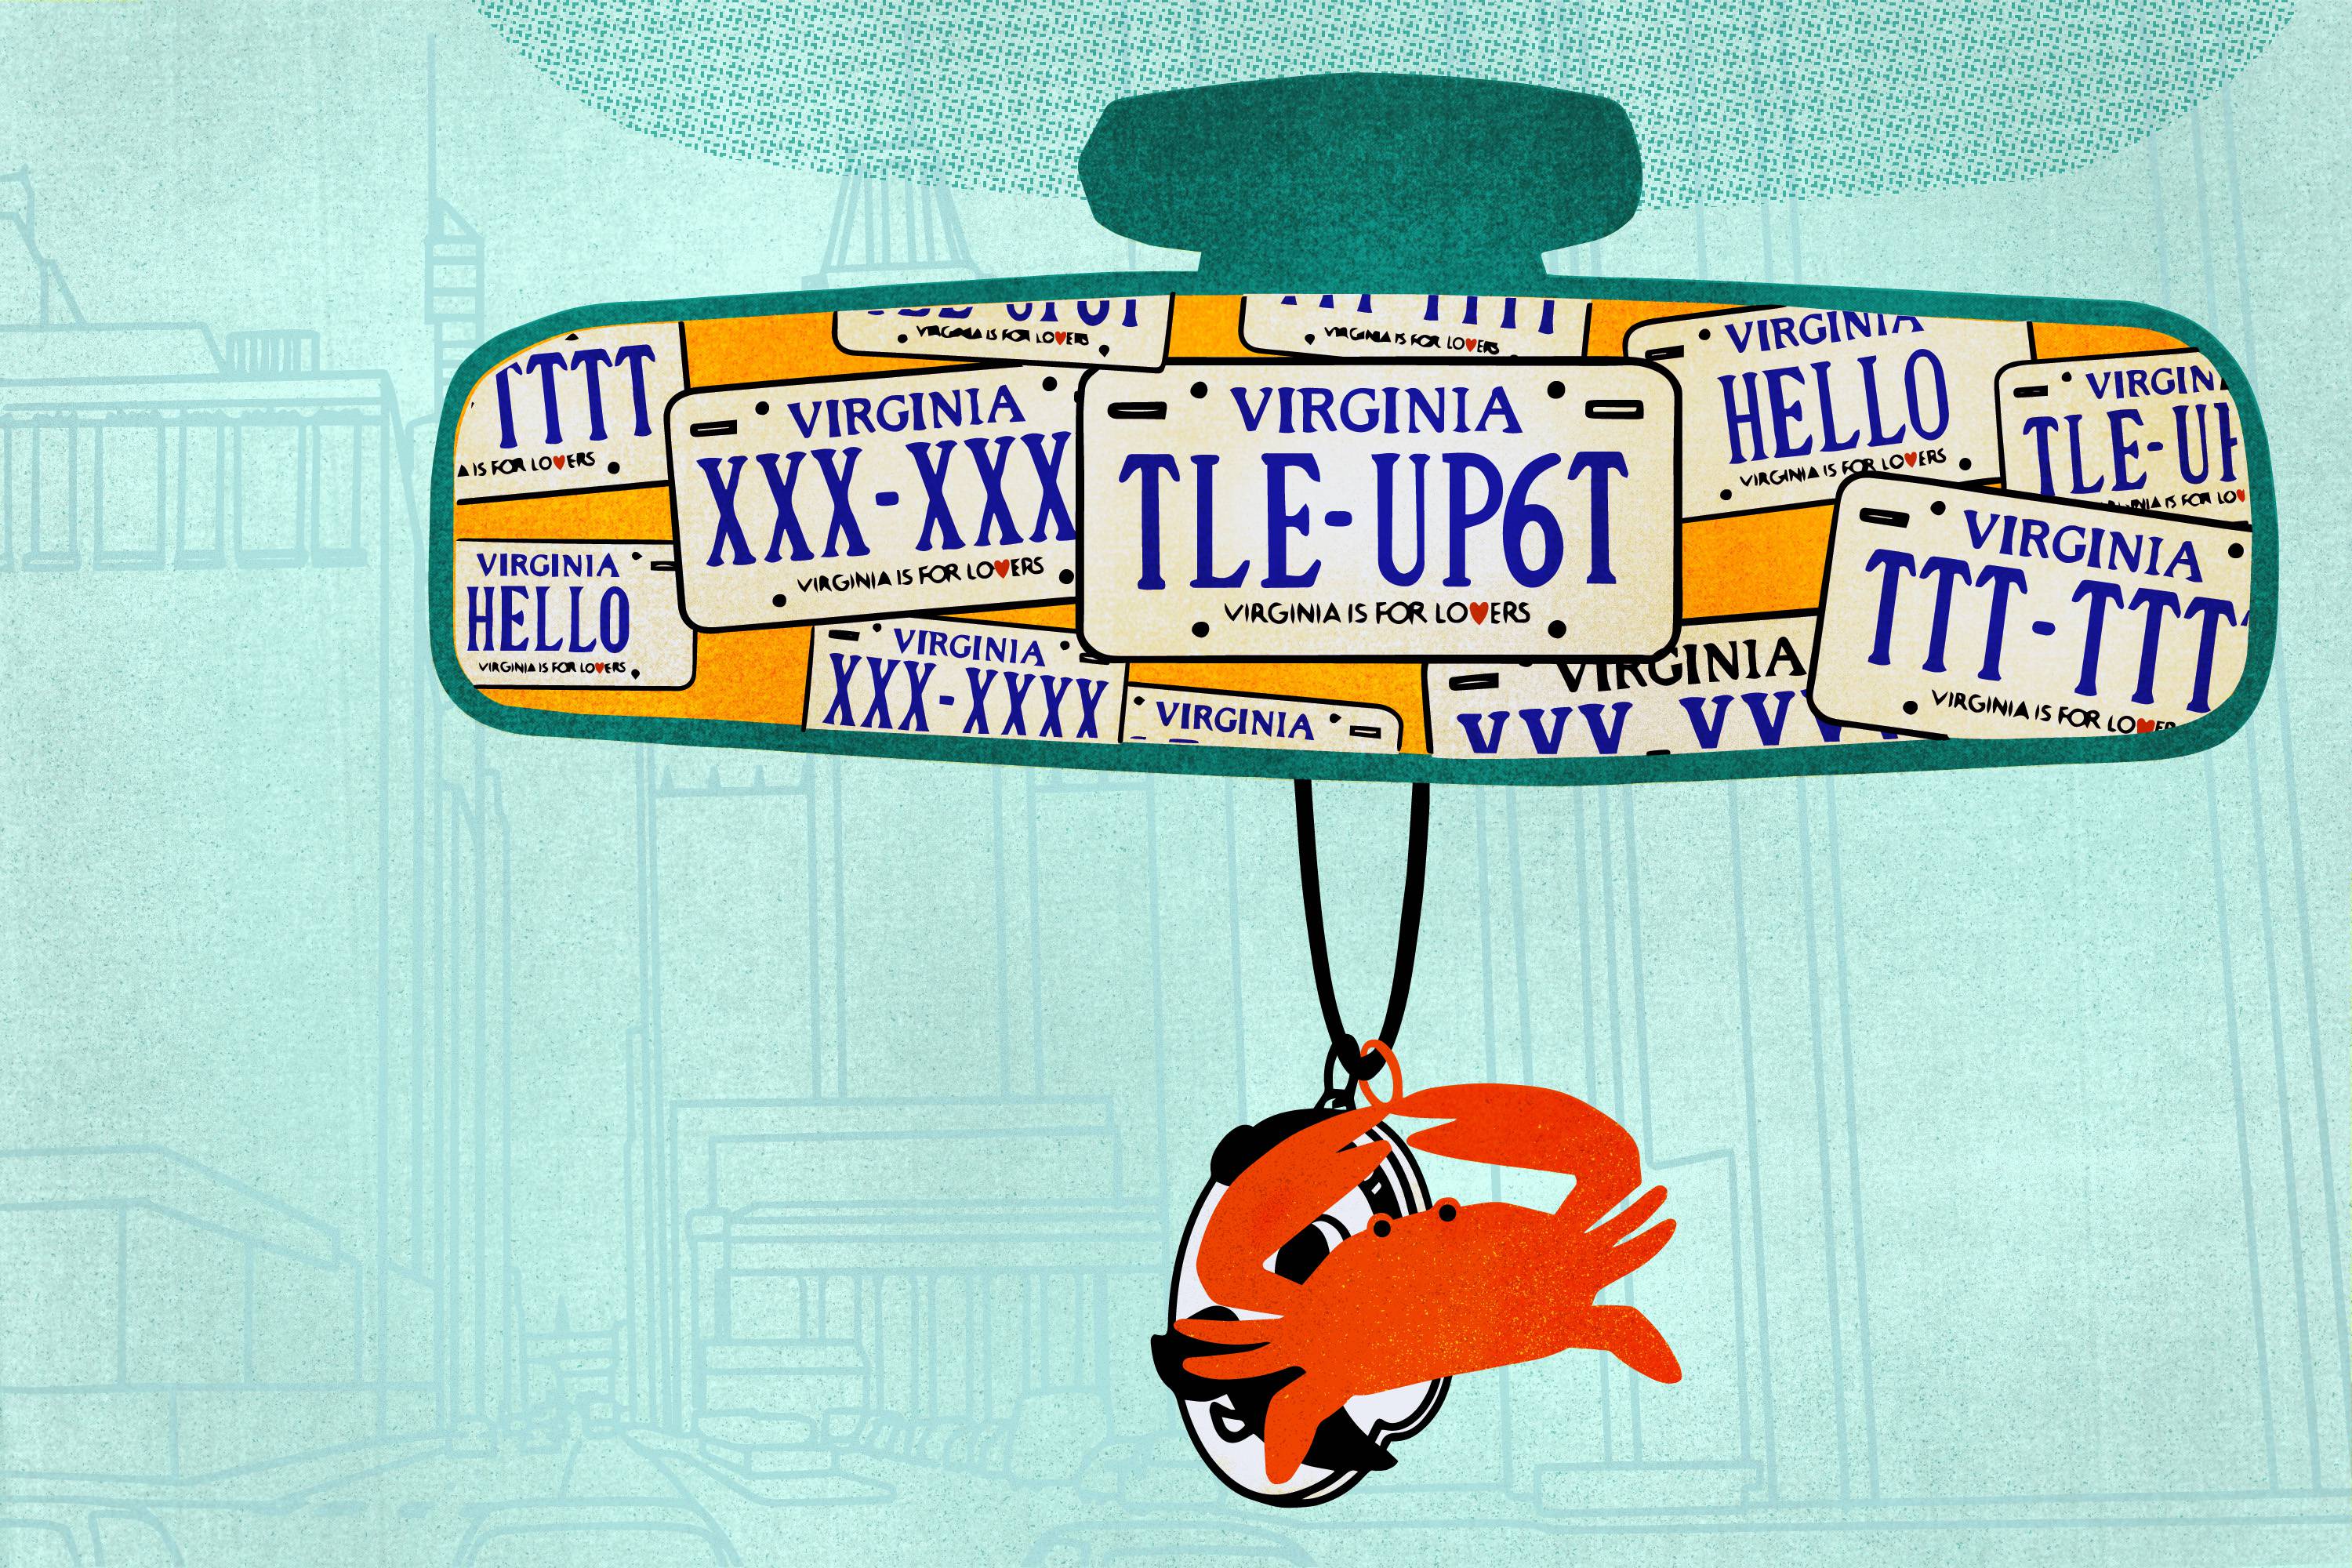 Illustration shows a rear view mirror whose image shows many Virginia license plates. In the background is a lightly sketched streetscape of downtown Baltimore. A crab and the Natty Boh logo hang from the rear view mirror.